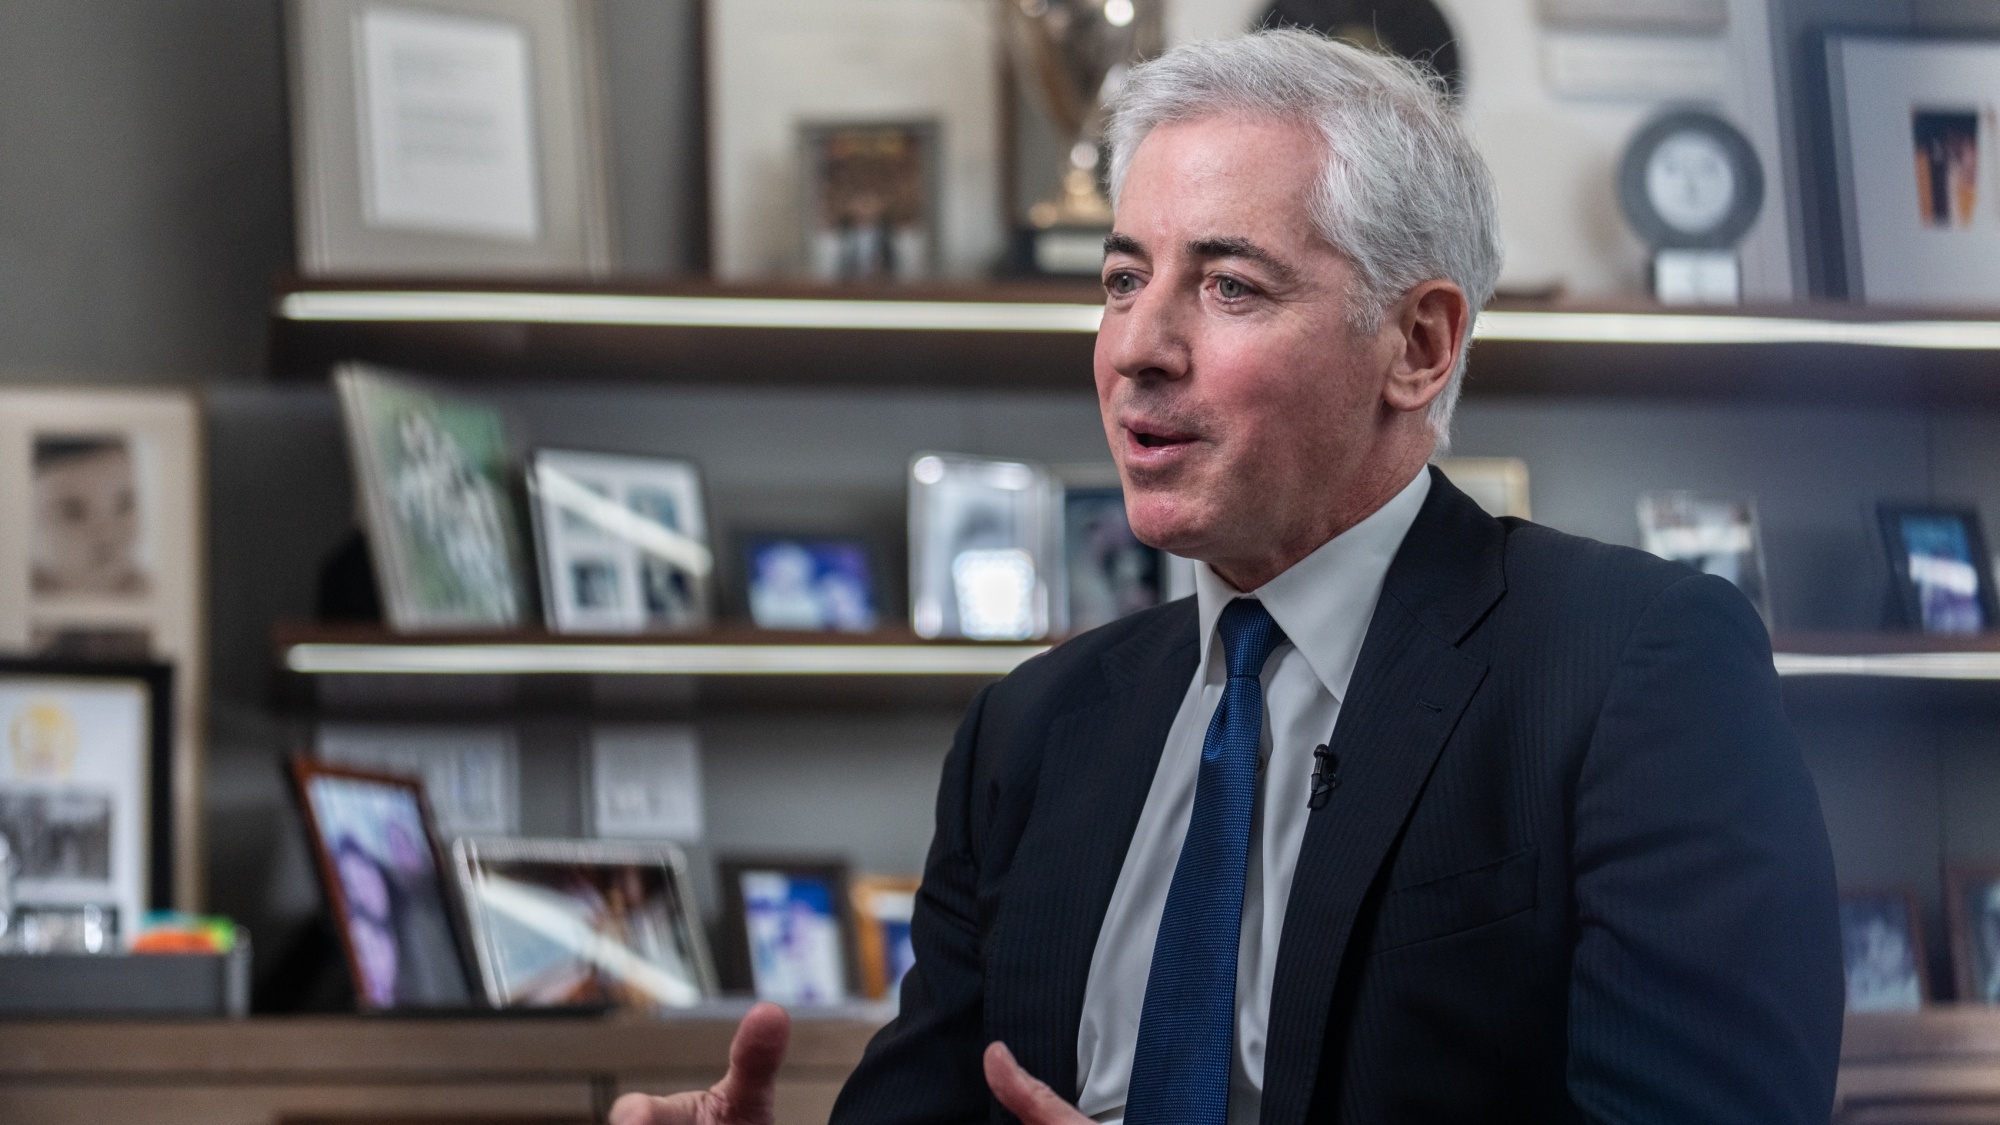 Pershing Square Capital Management founder Bill Ackman, known for his strategic investments, had previously supported Donald Trump's Republican rivals, including Nikki Haley, in the party's primary contest earlier this year. 

Image Source: Bloomberg 